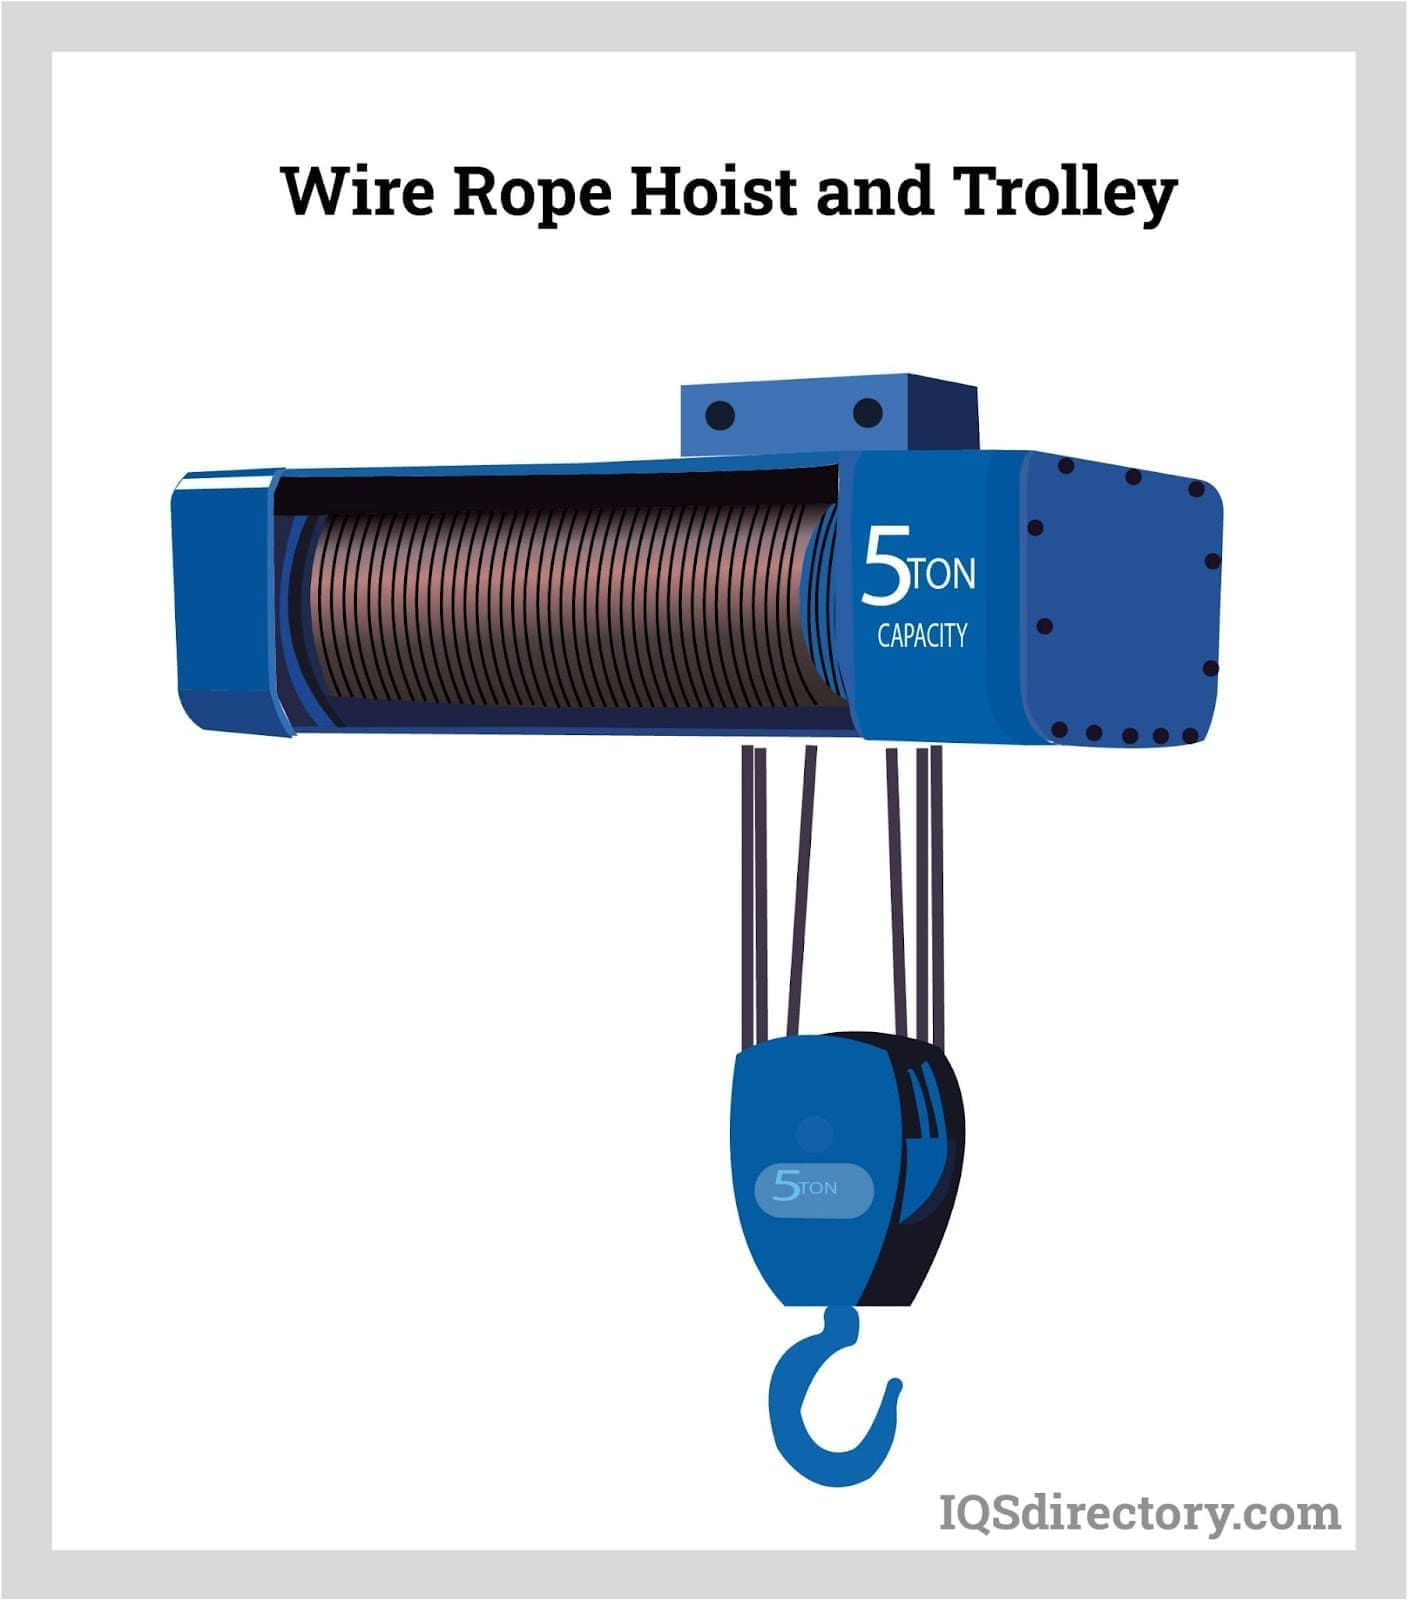 Wire Rope Hoist and Trolley